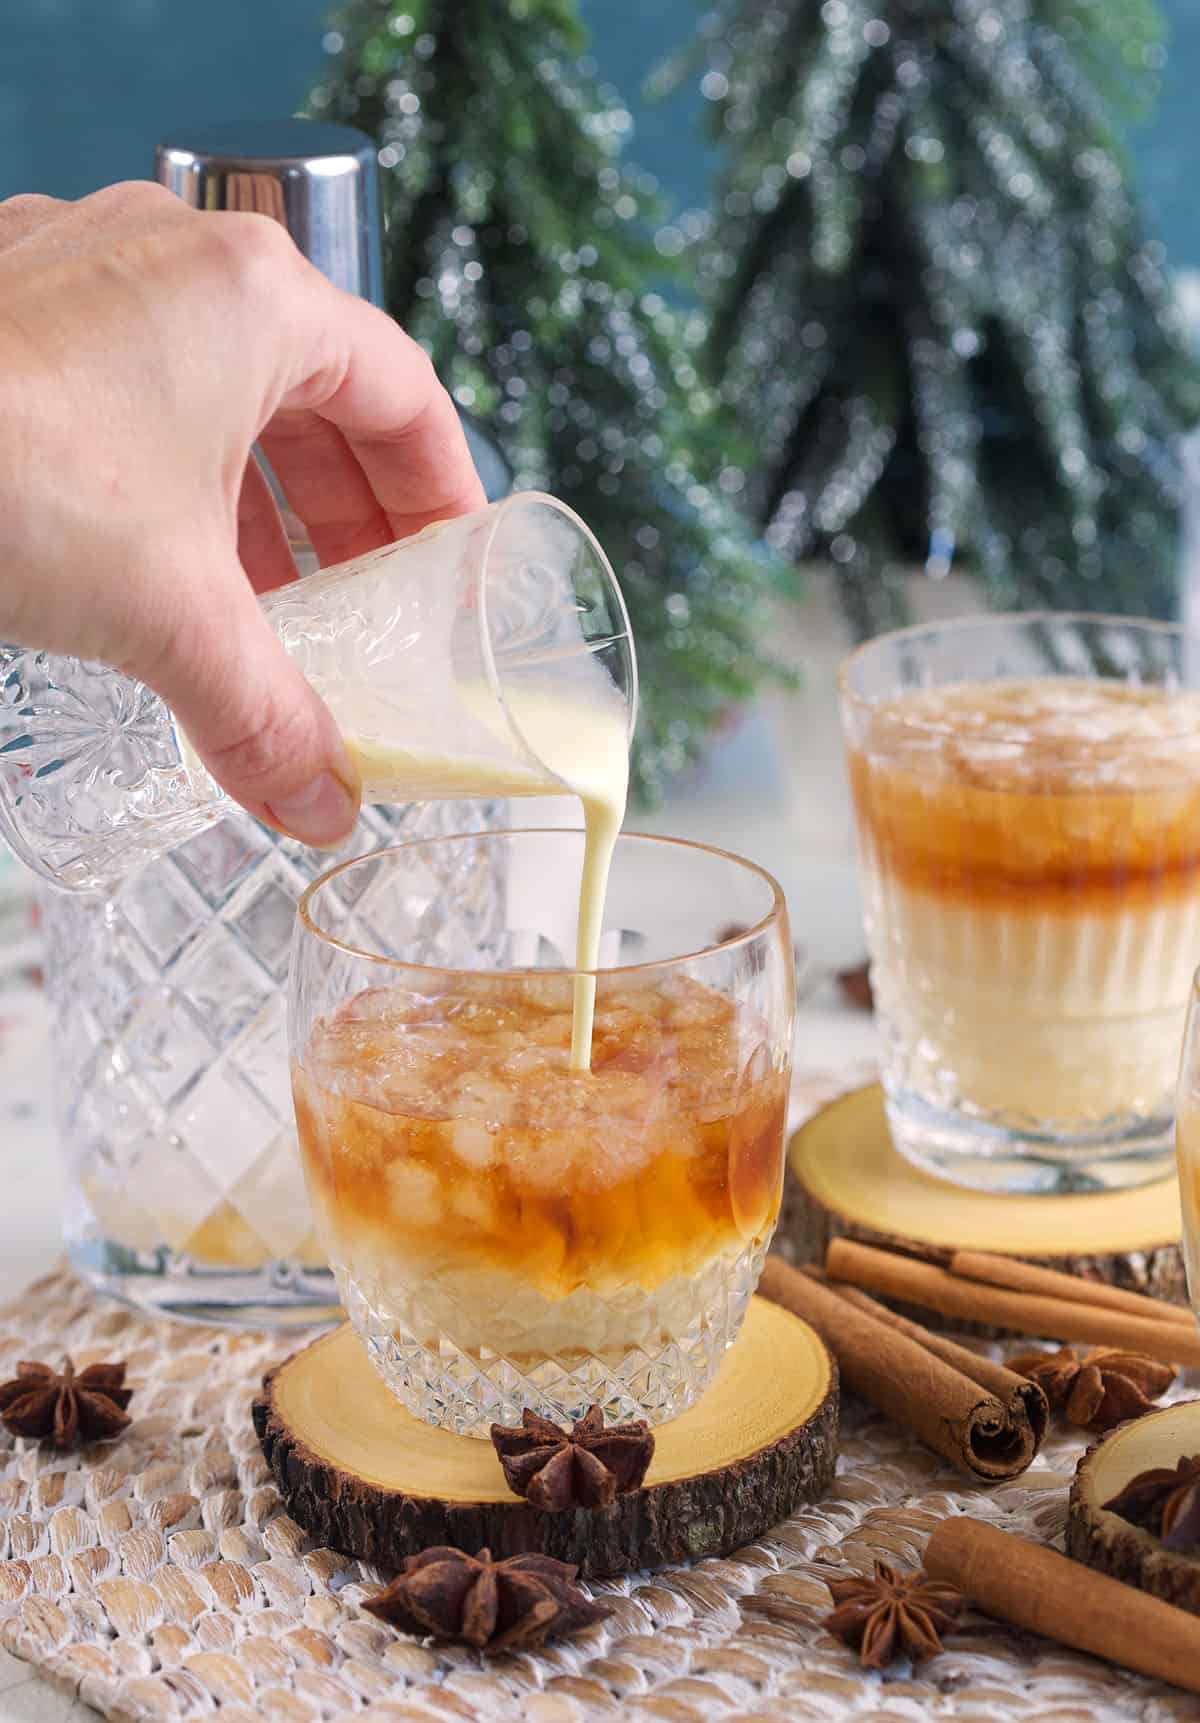 Eggnog is being poured into a glass of white russianingredients. 